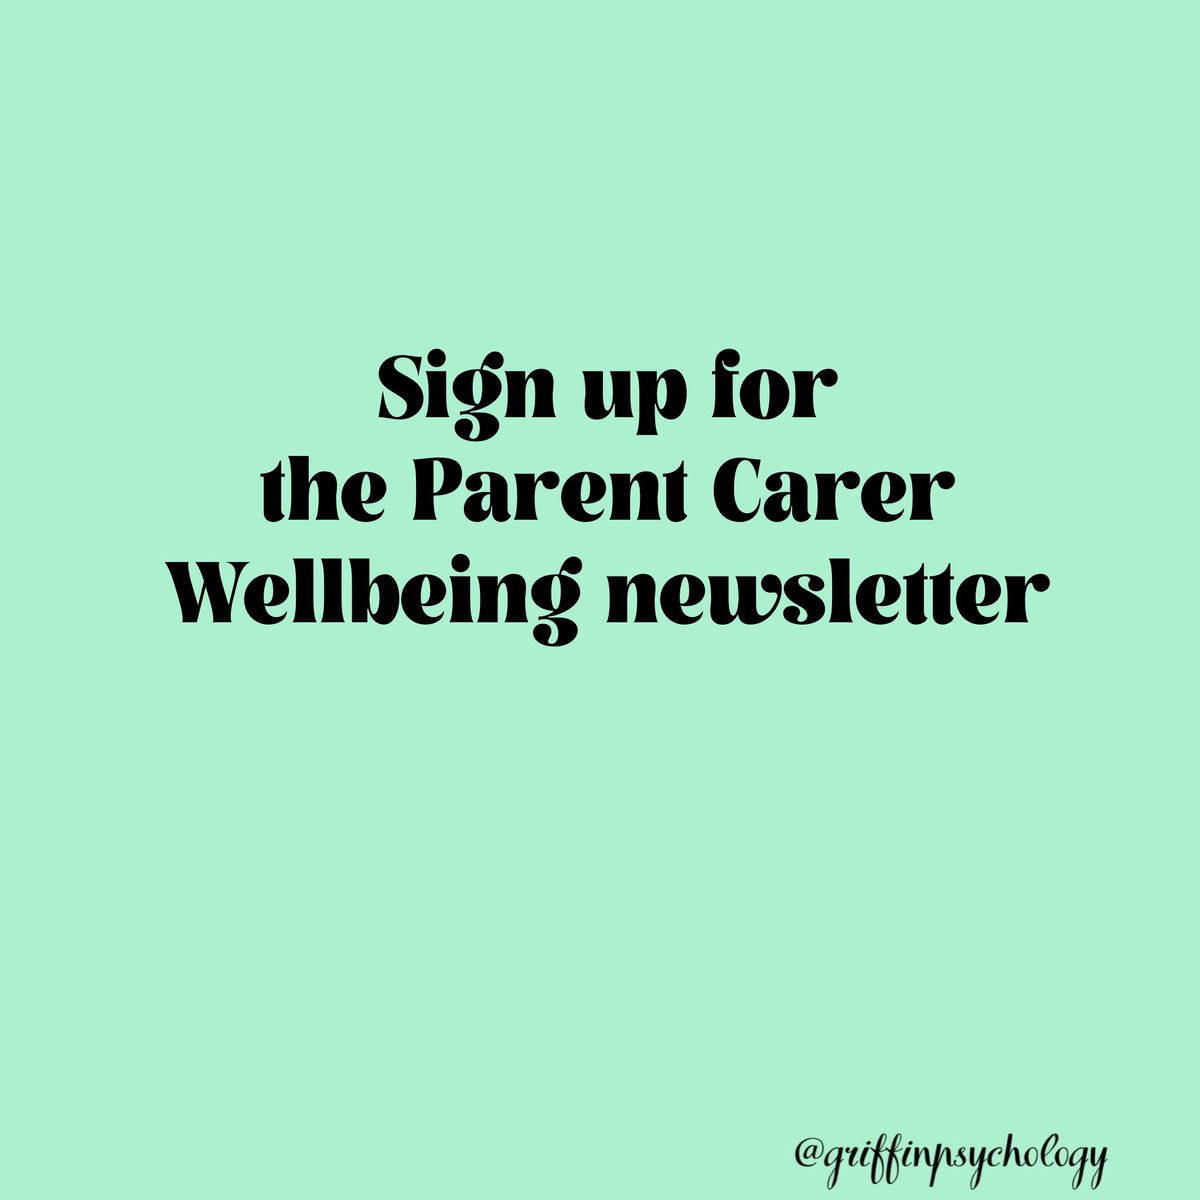 Professionals with an interest in the psychological wellbeing of parents of disabled children - sign up to info & research quarterly newsletter here:

bitly.ws/Q2wR

#parentcarers and #specialneedsparents can sign up too

#parentcarerwellbeing 
Affinityhub.uk